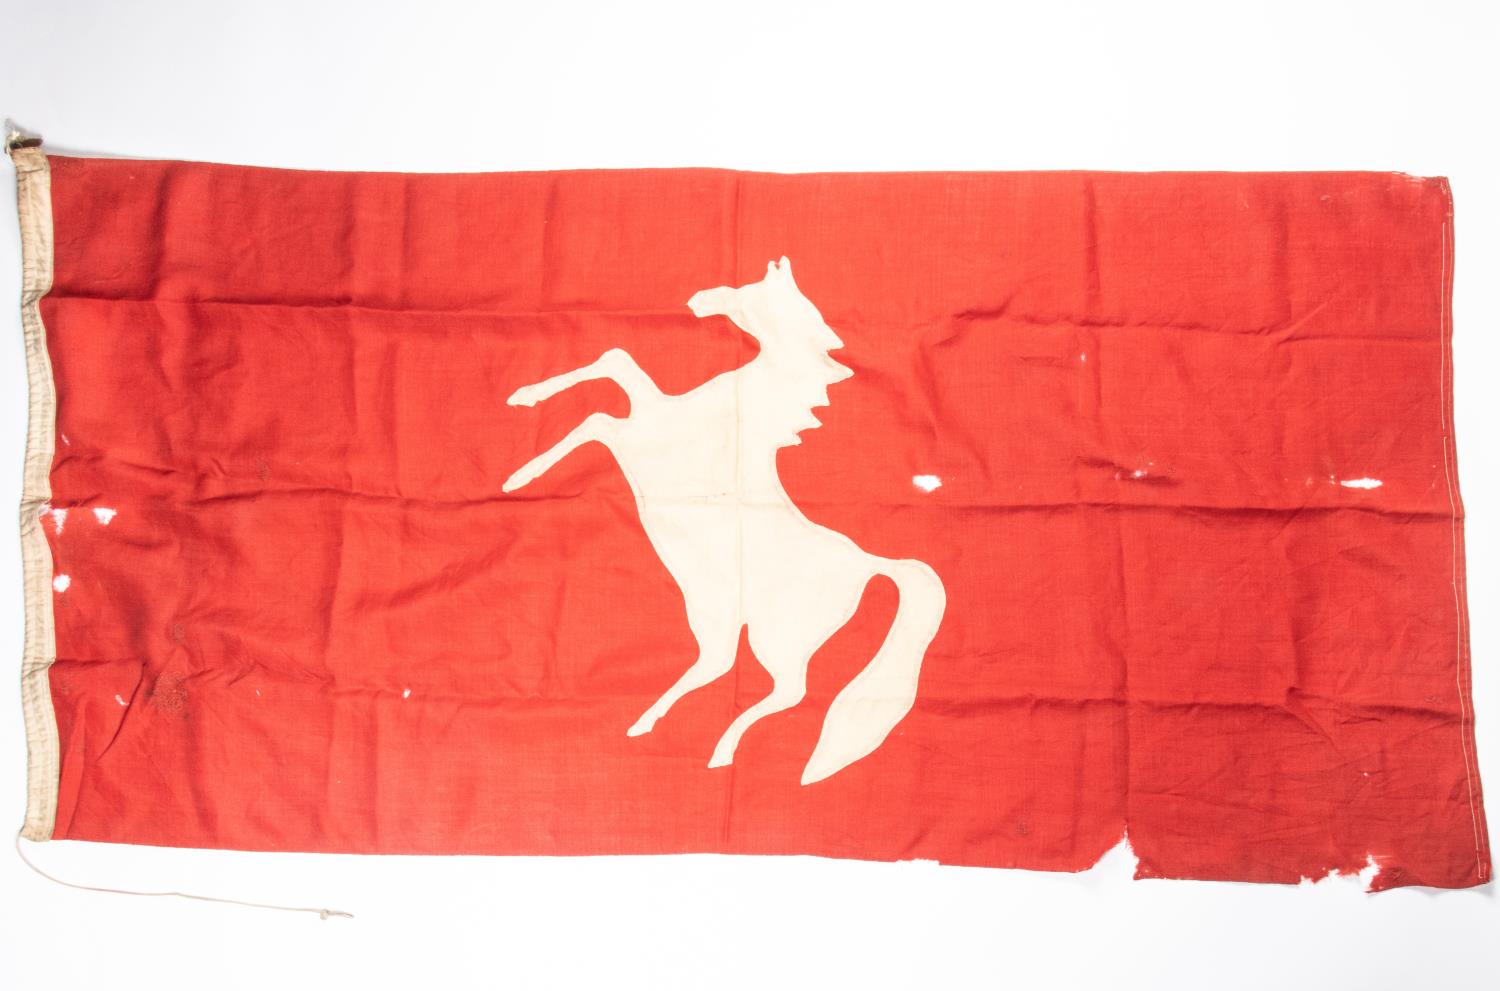 A WWI military flag, 68" x 33", red cloth with white prancing horse applied, possibly a divisional